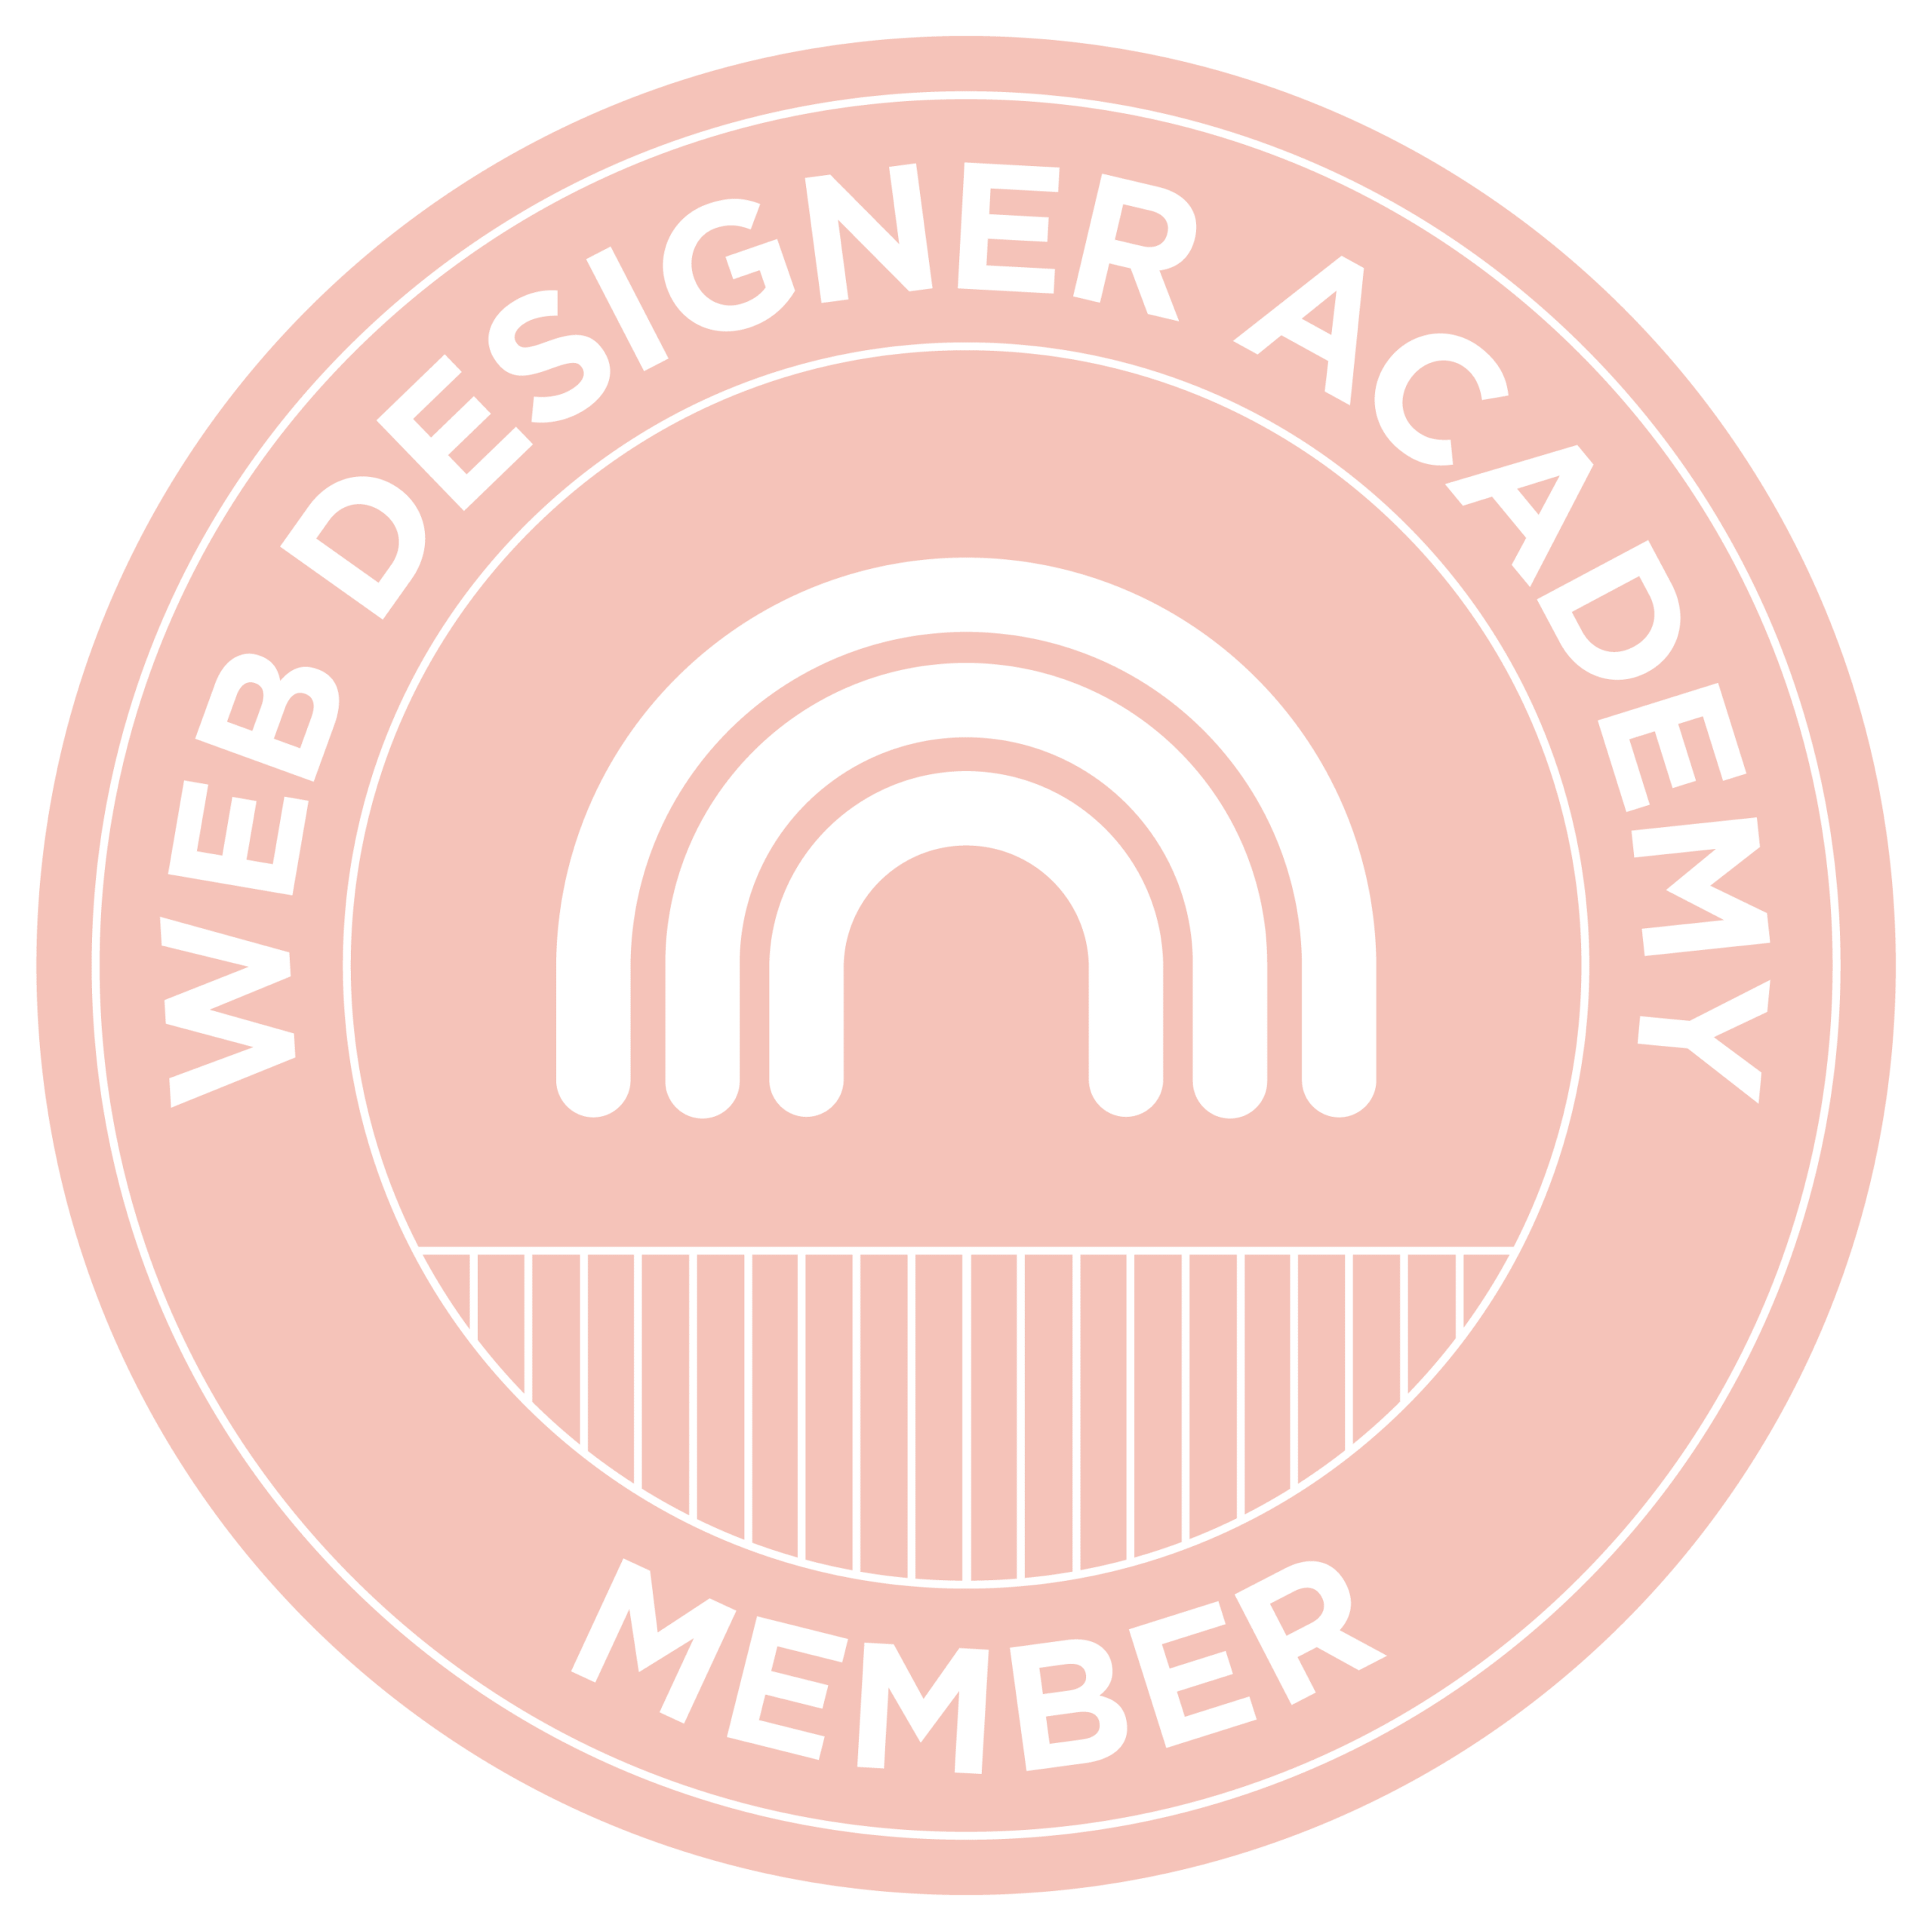 A person is signing up to become a member of an online web design academy. Full Text: R ACADEMY WEB DESIGN MEMBER